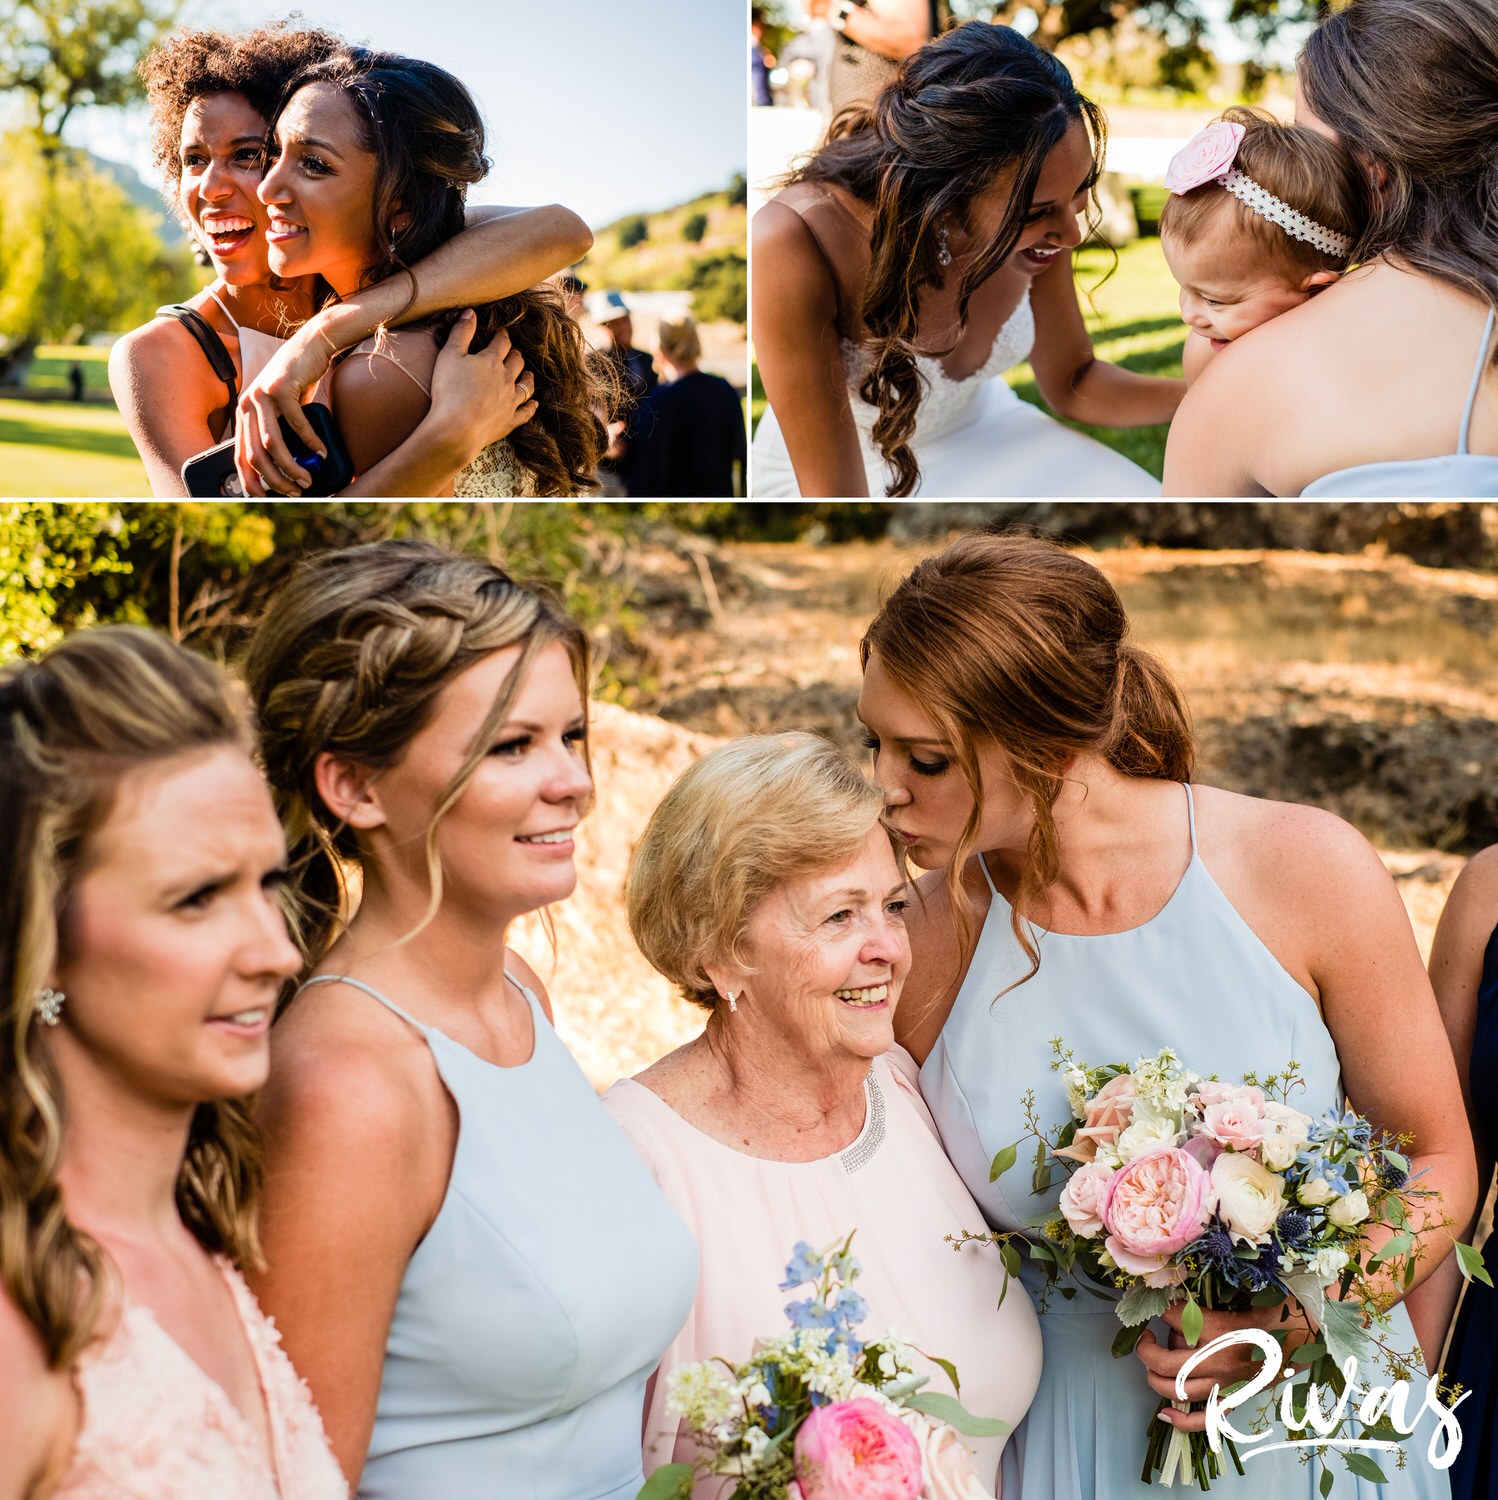 Saddlerock Ranch Summer Wedding | Destination Wedding Photographers | Rivas | A group of three candid photos taken during a cocktail hour as wedding party members celebrate with friends and families in attendance at a Saddlerock Ranch wedding and reception. 